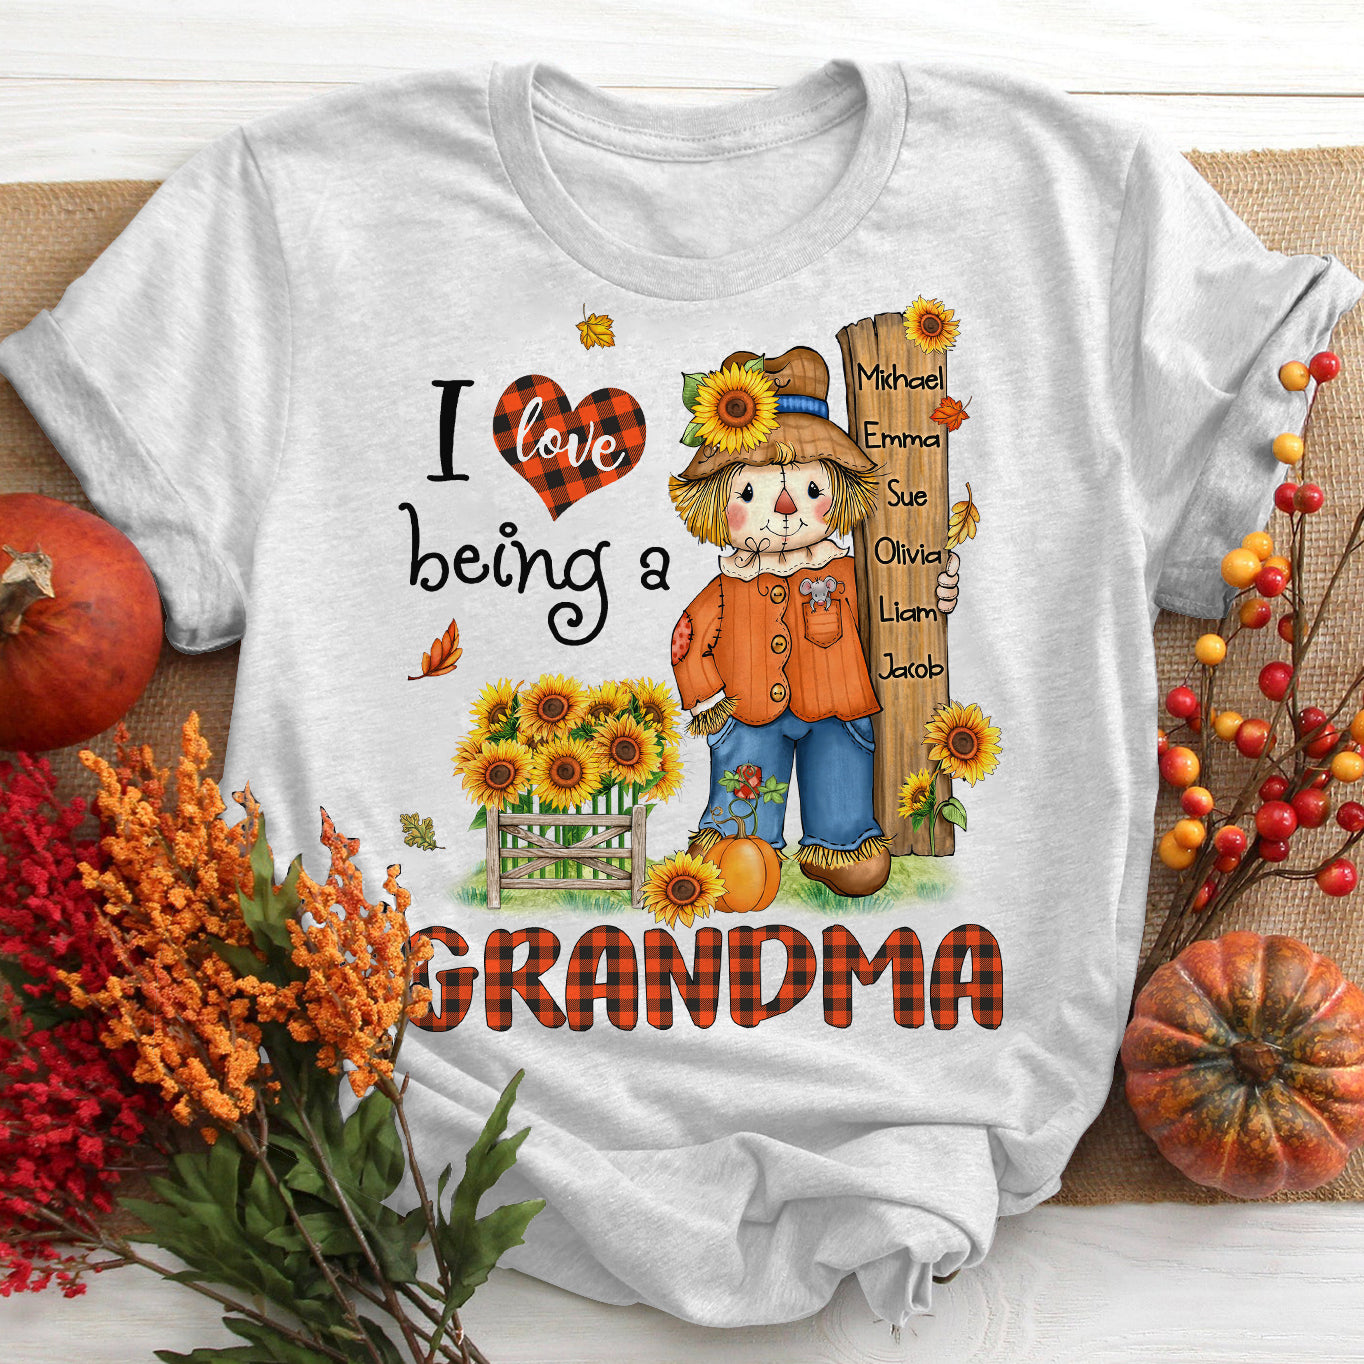 I Love Being a Grandma with Personalized Kidnames T-Shirt